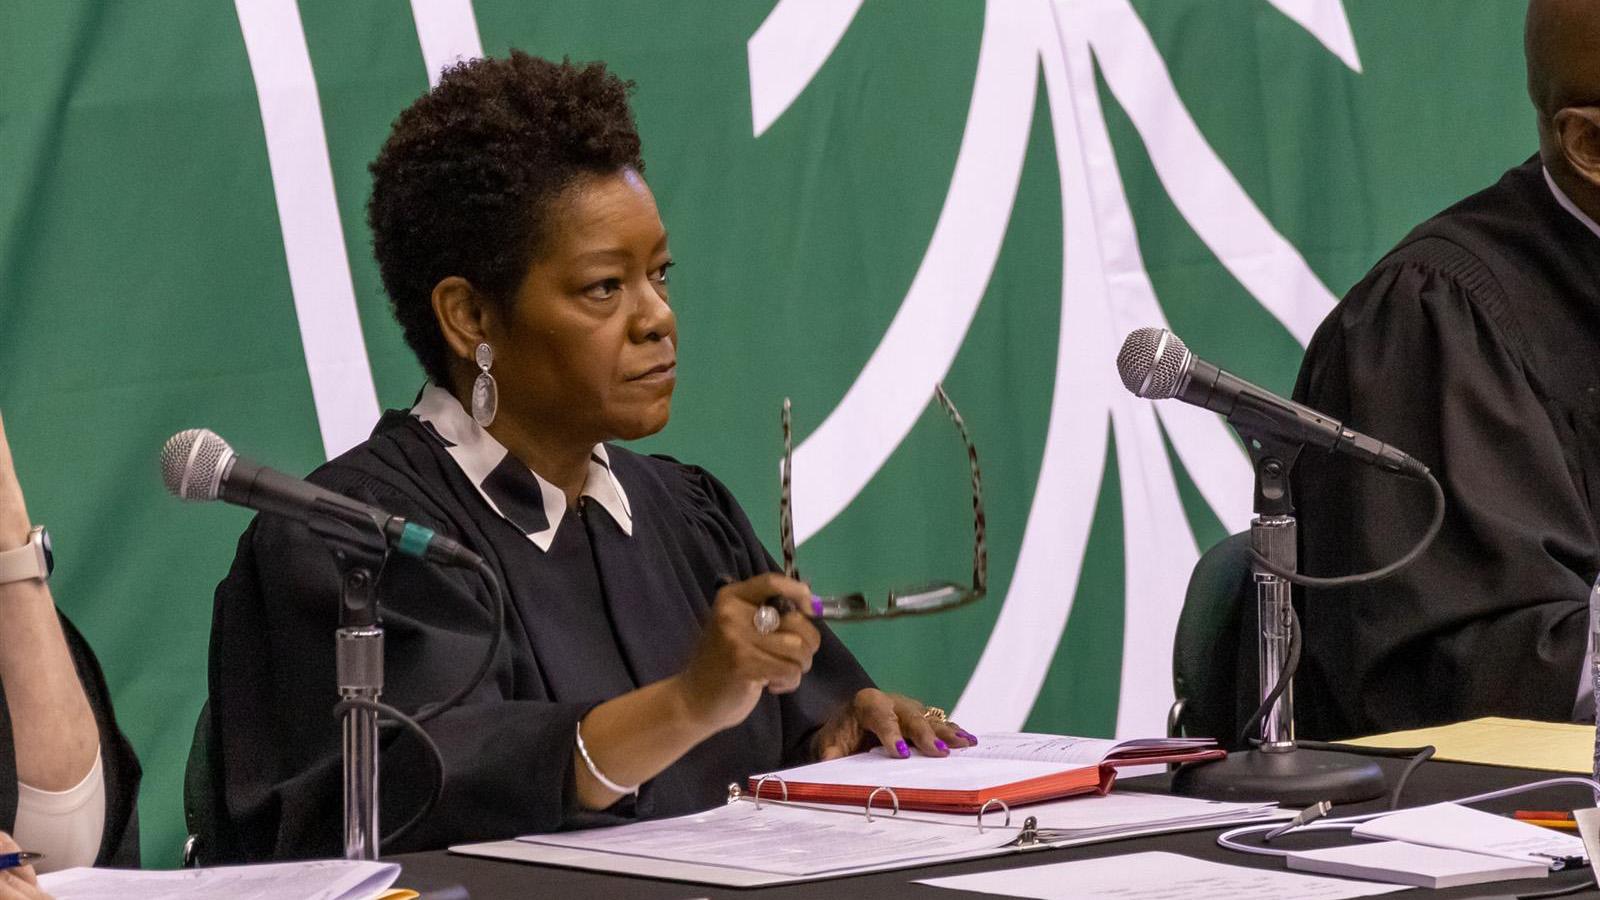 Justice Lisa Holder White is pictured in a file photo during the Illinois Supreme Court's oral arguments at Chicago State University in May. (Andrew Adams / Capitol News Illinois)